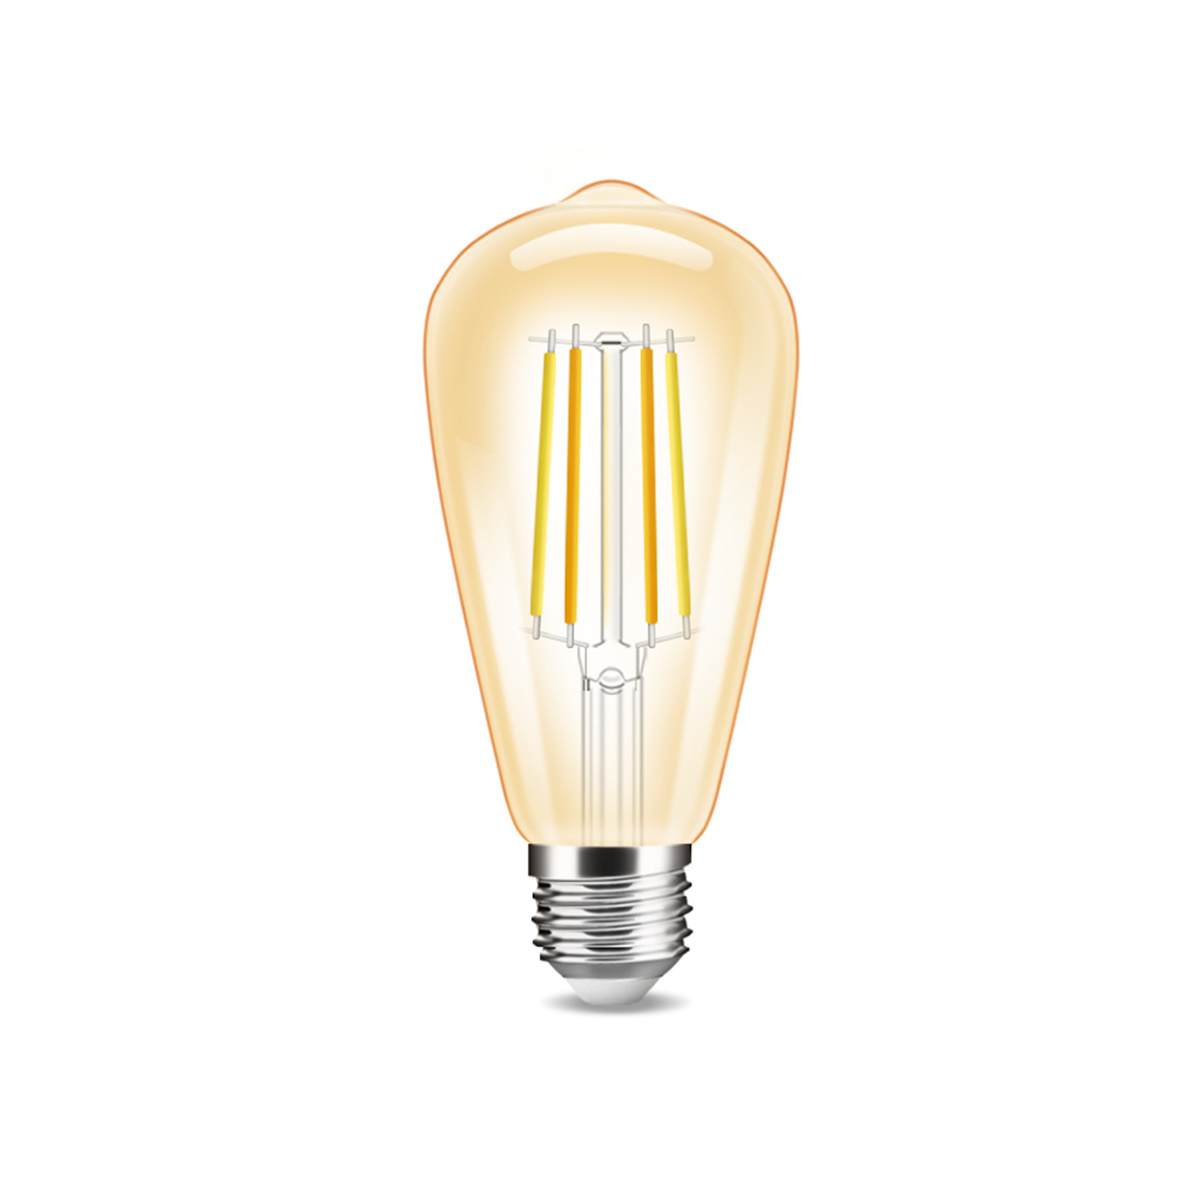 Europe style for Smart Rgb Downlights - Dimmable Smart Filament Bulb E27 Vintage With tunable white 2200-6500K CBS – C-Lux